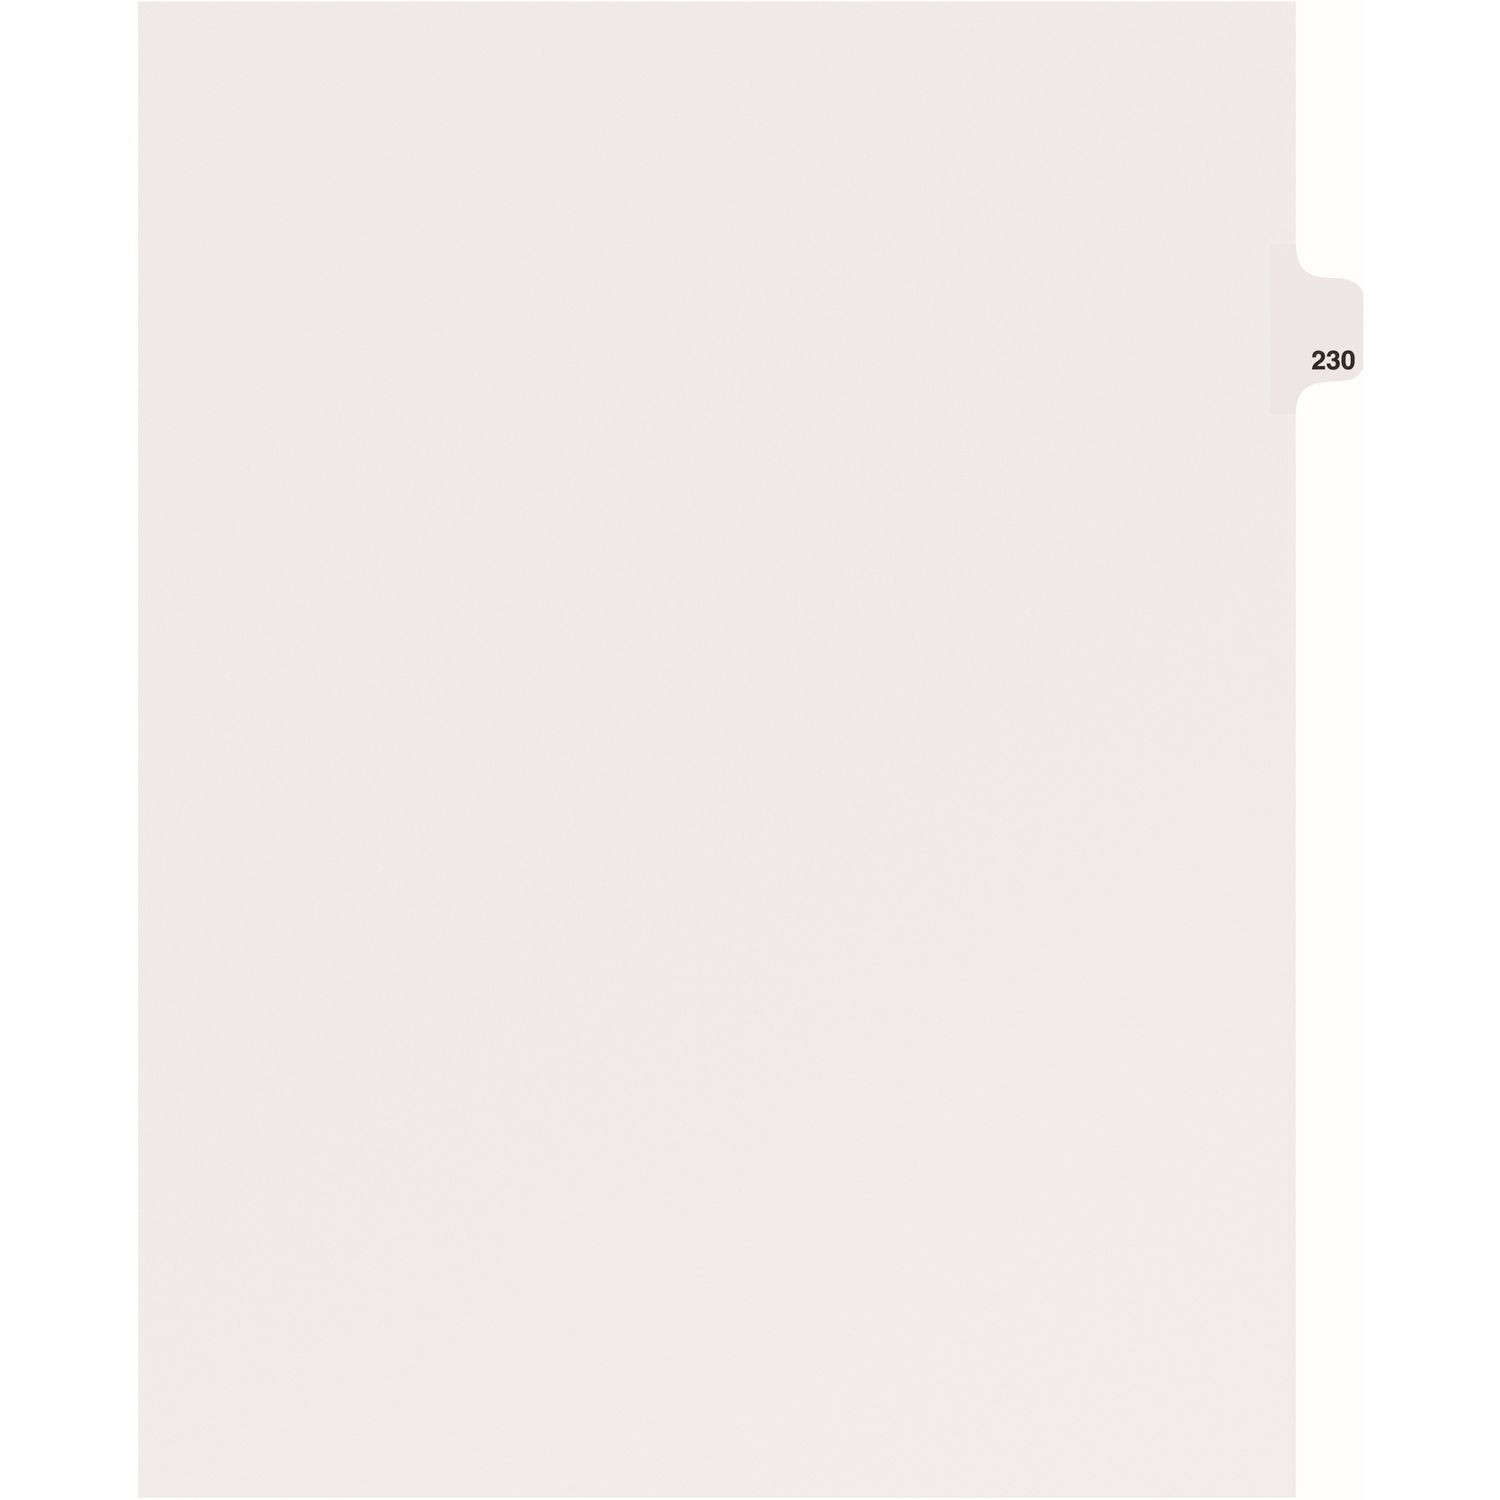 Side Tab Individual Legal Dividers 25 x Divider(s), Side Tab(s), 230, 1 Tab(s)/Set, Letter, 8 1/2" Width x 11" Length, White Paper Divider, 1